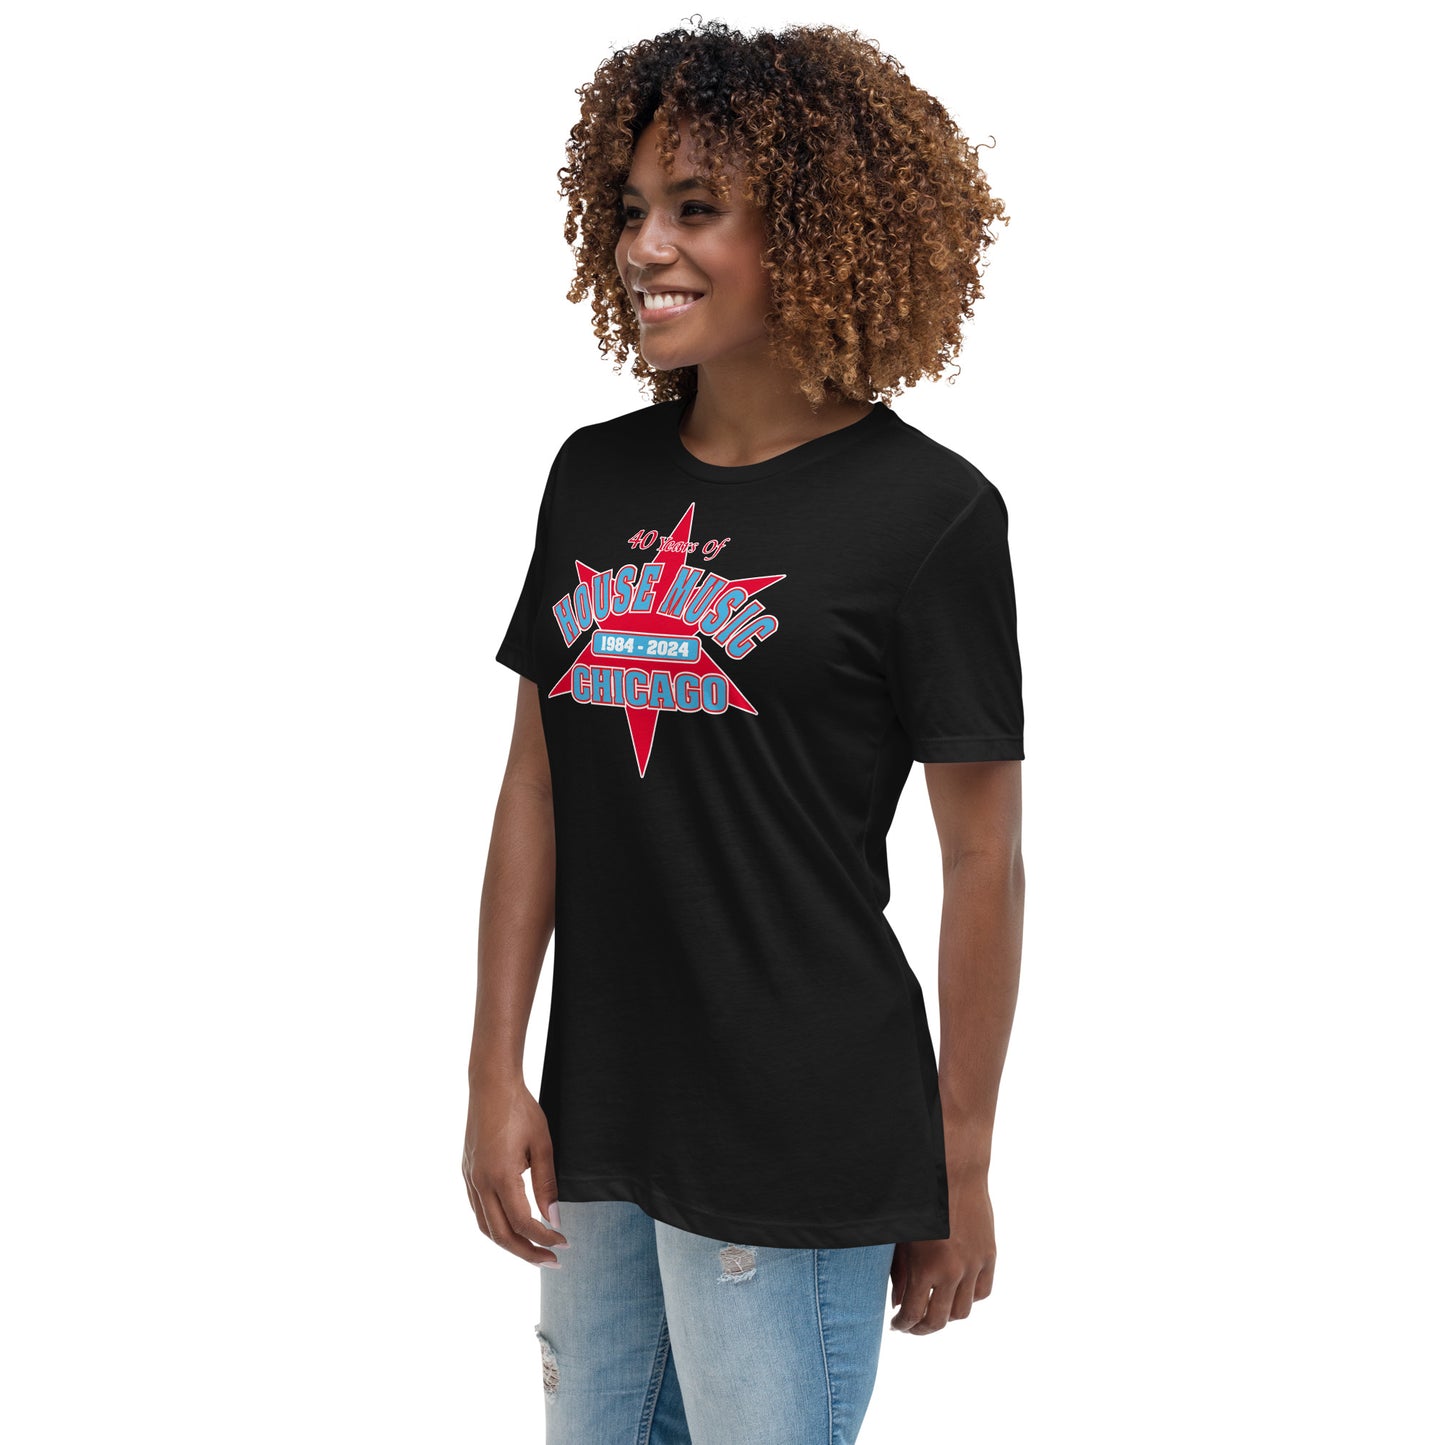 LIMITED EDITION | 40 Years of House Music | Women's Relaxed T-Shirt